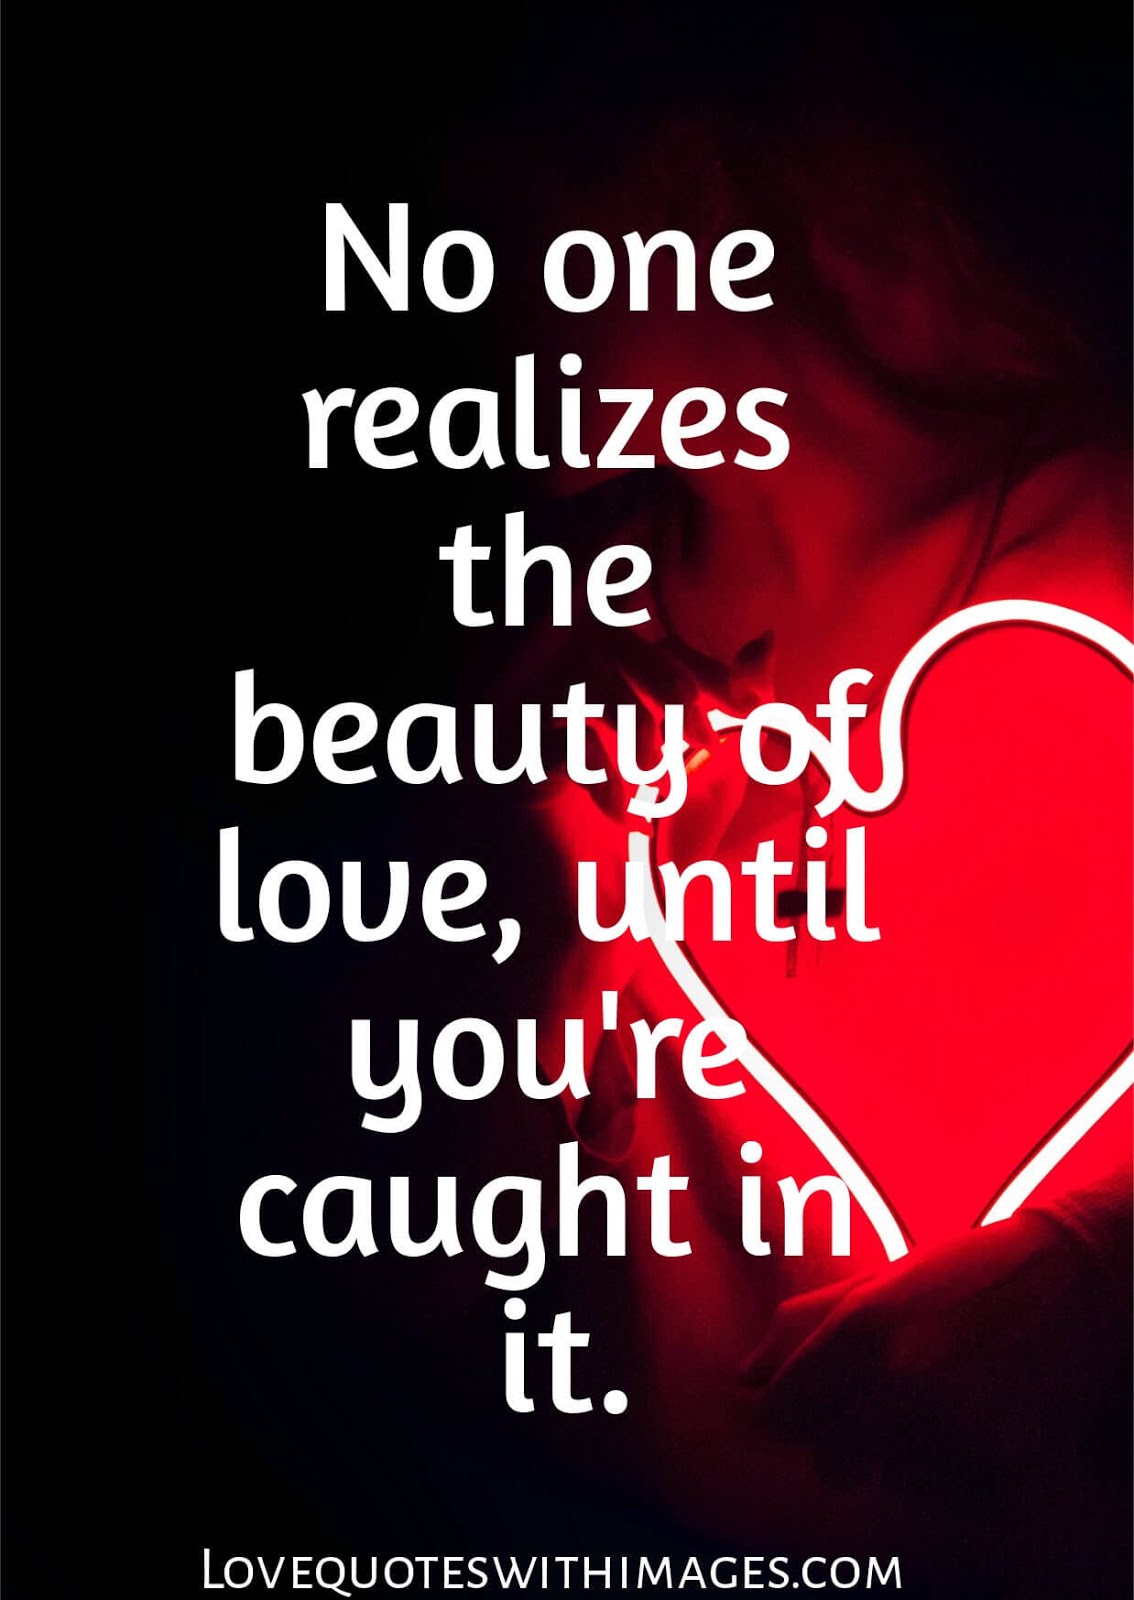 Quotes About Love Girlfriend - Wallpaper Image Photo